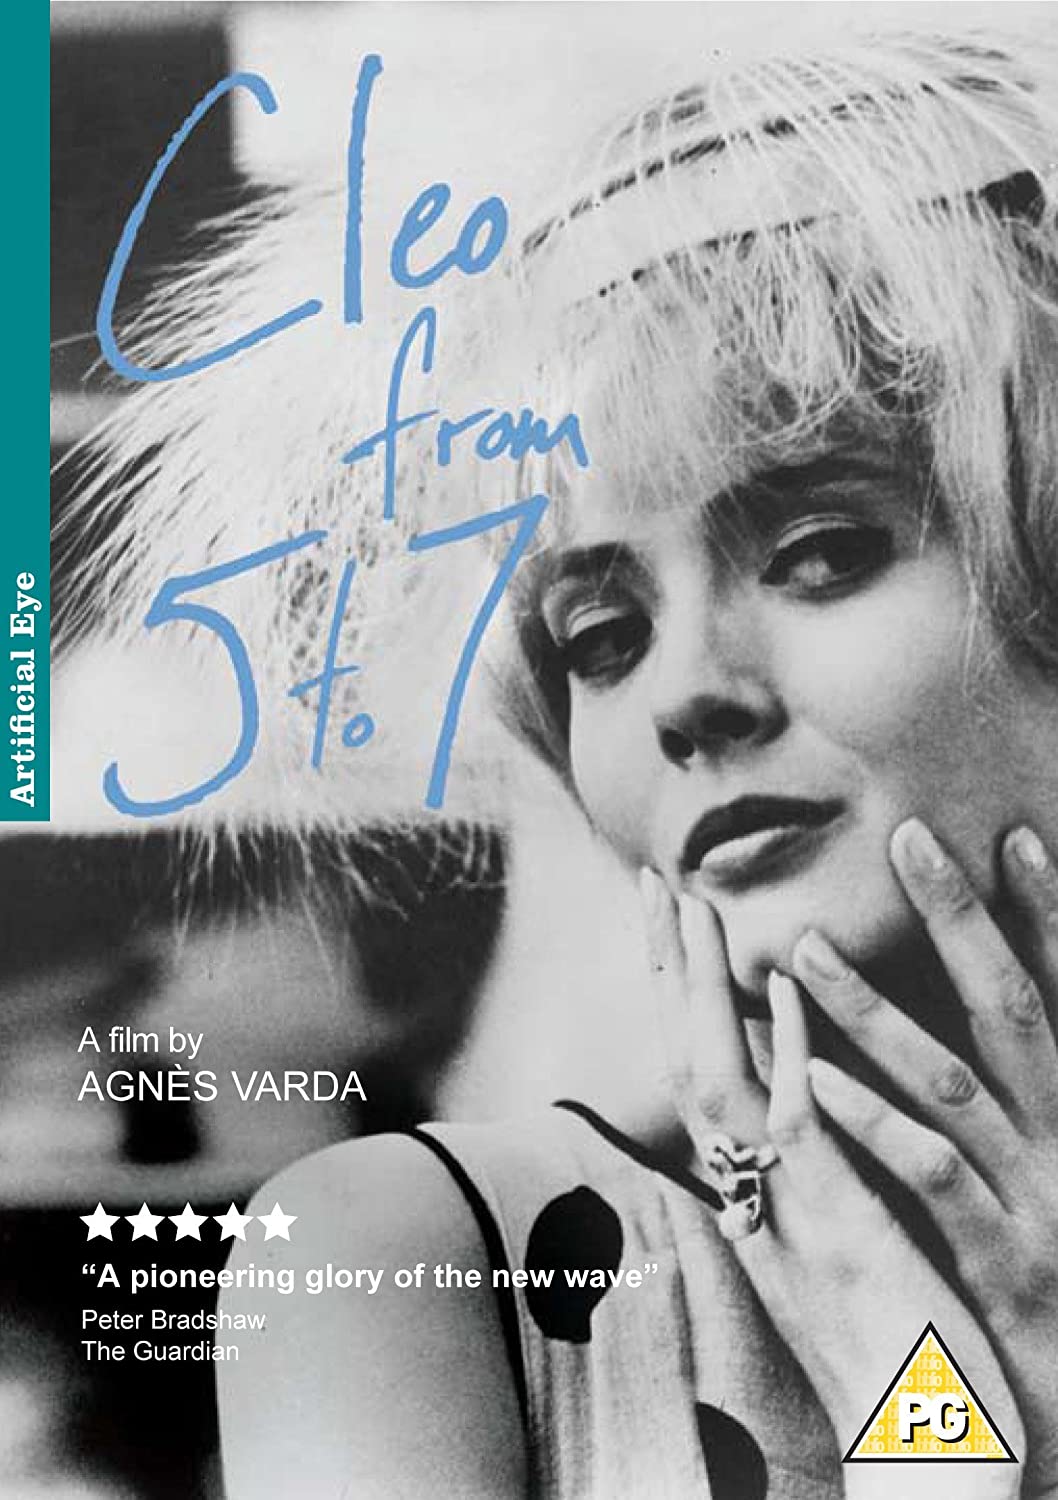 Cleo from 5 to 7 - Drama/Music [DVD]